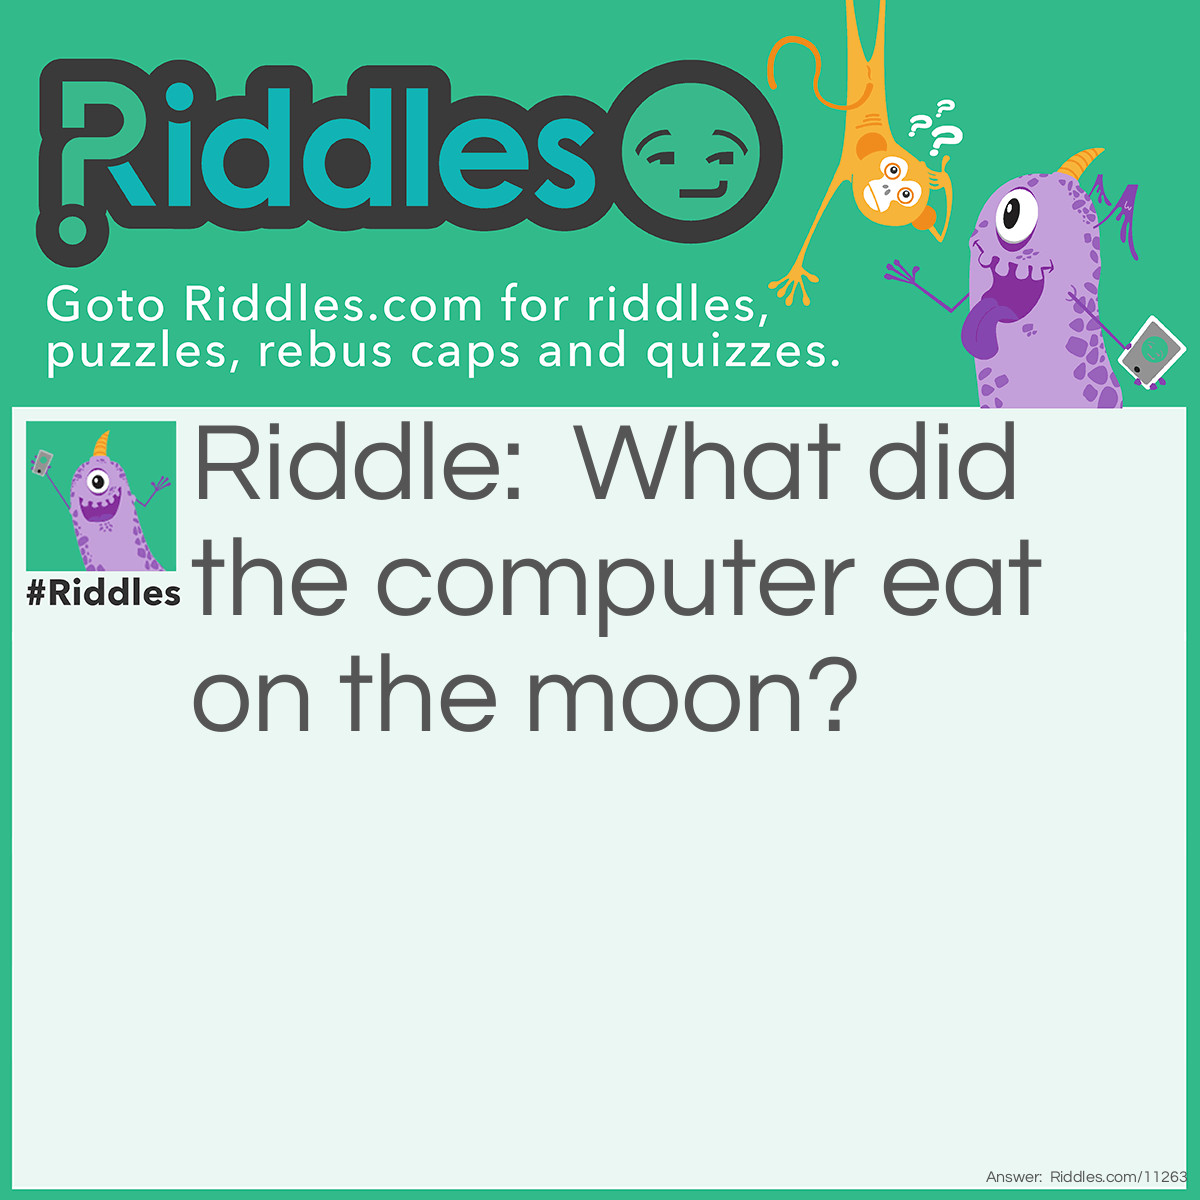 Riddle: What did the computer eat on the moon? Answer: Spacebars!